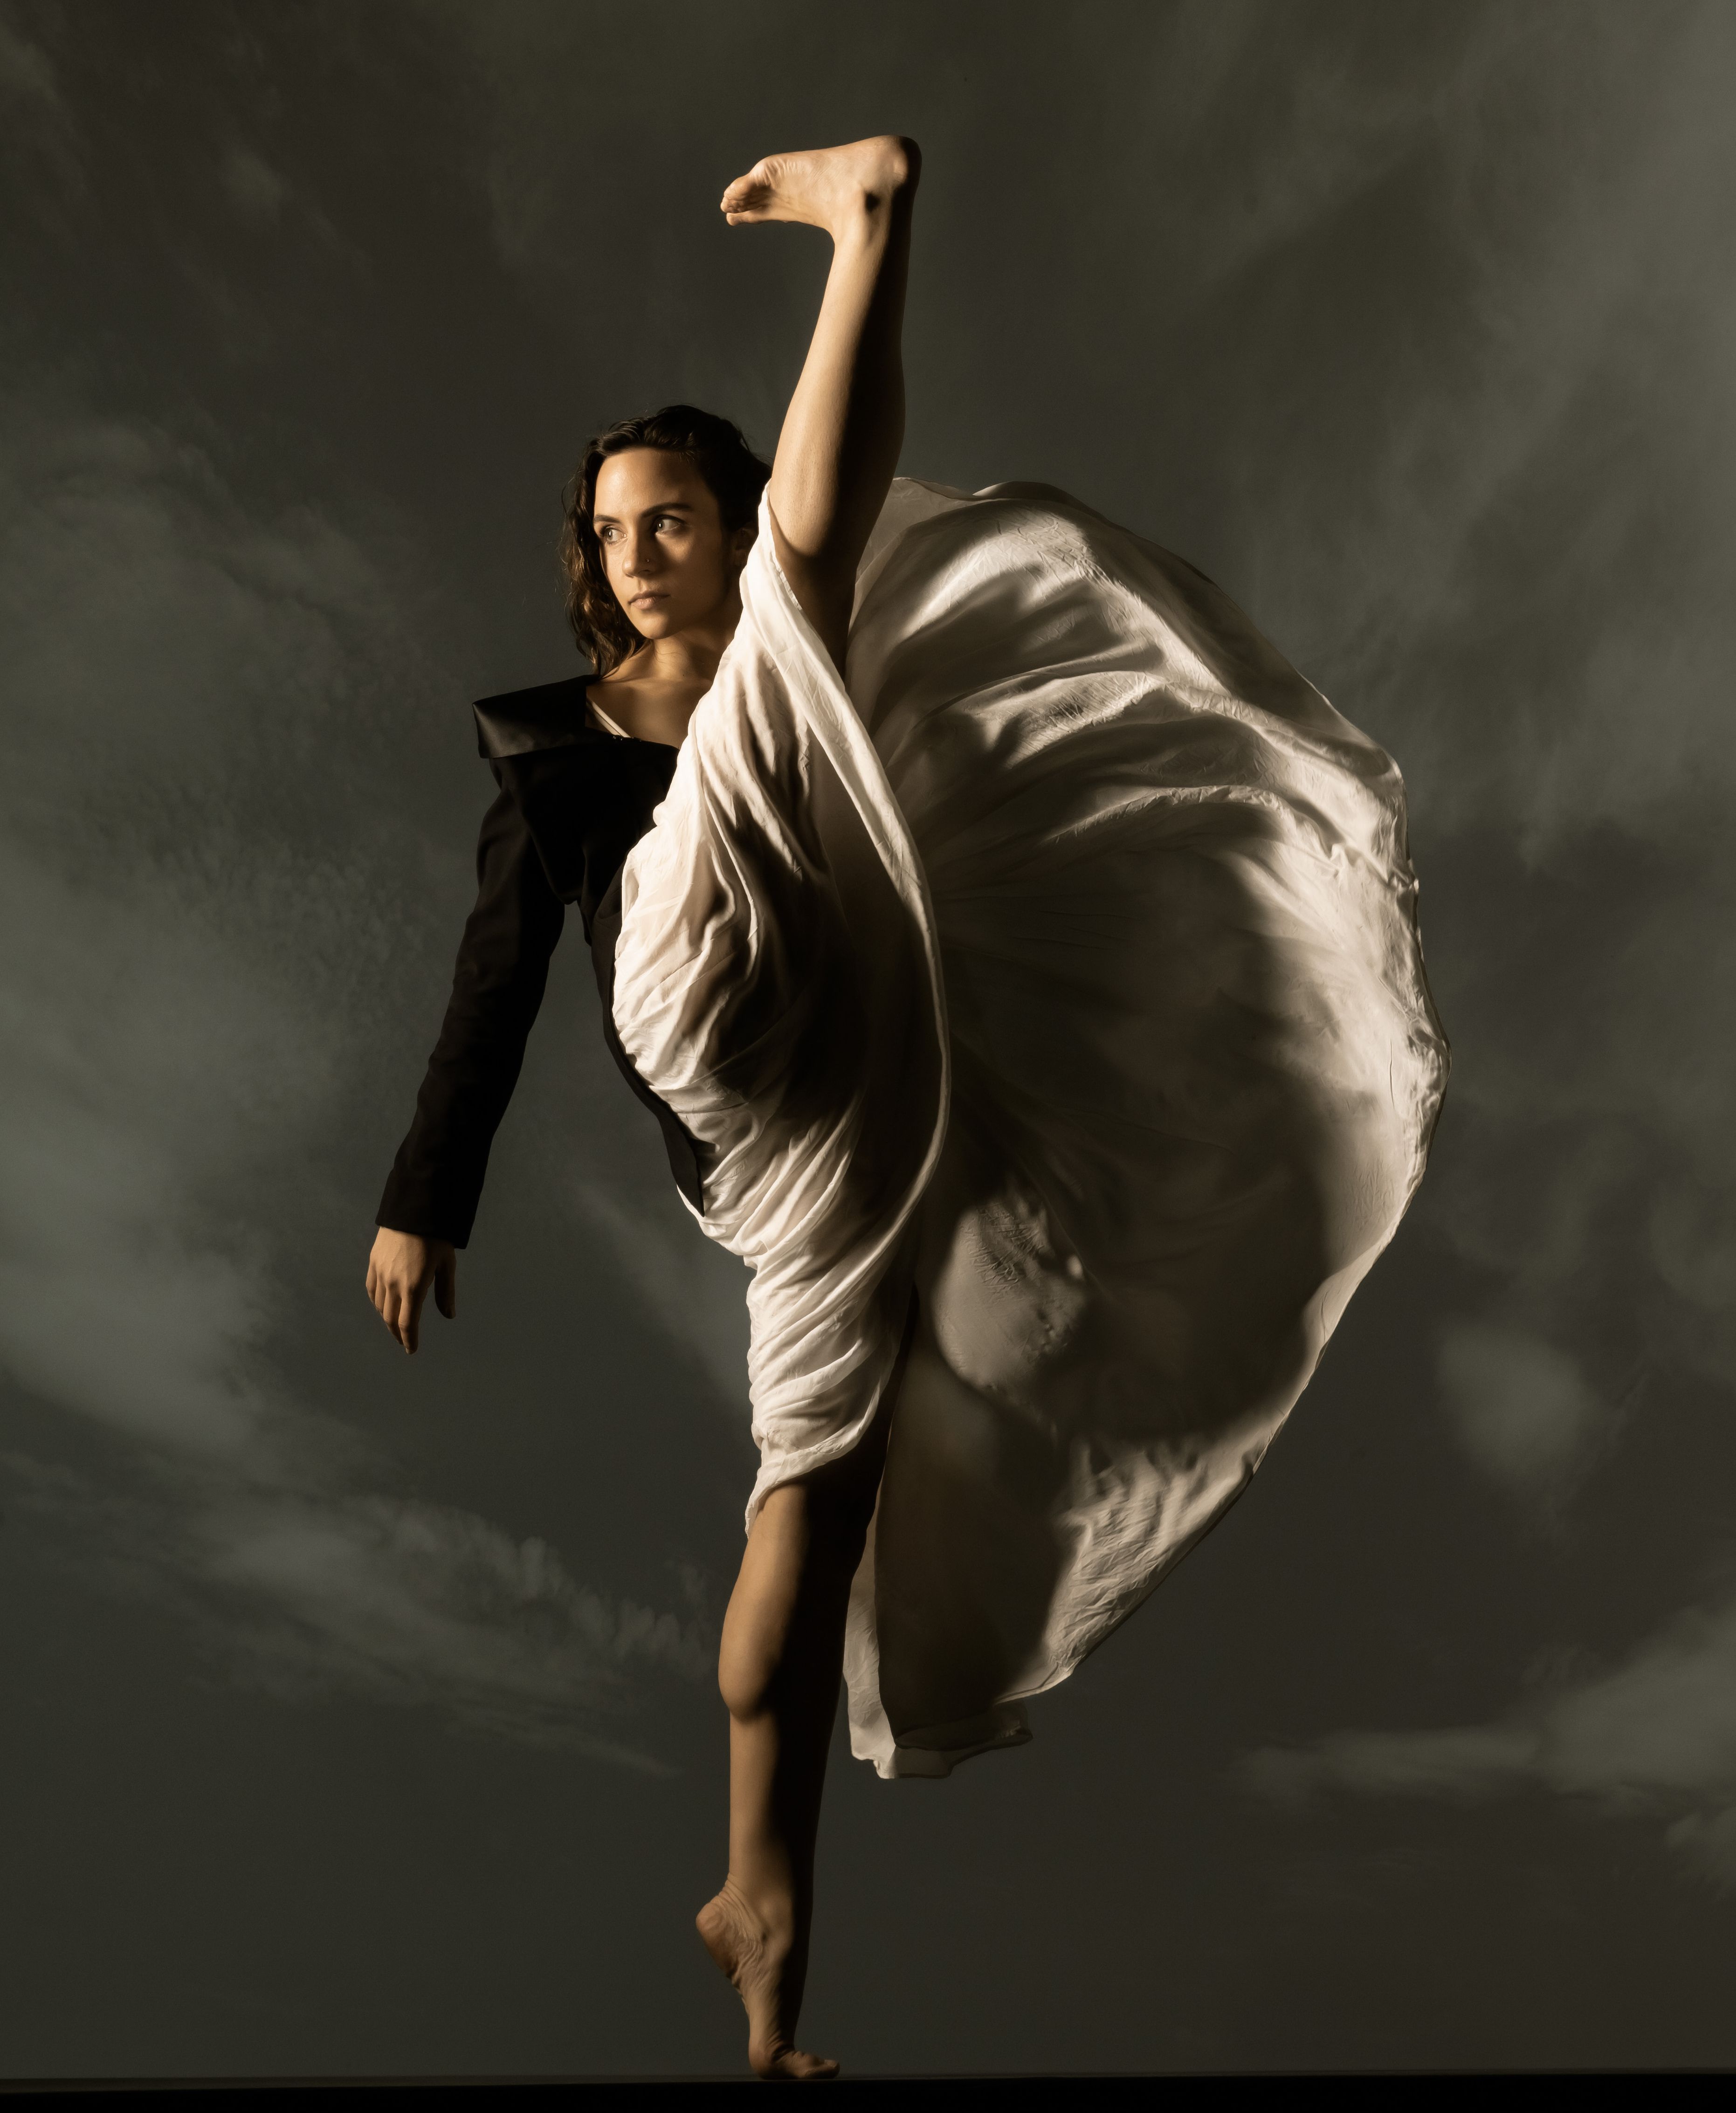 dancer in ivory colored billowing skirt kicks on leg above head